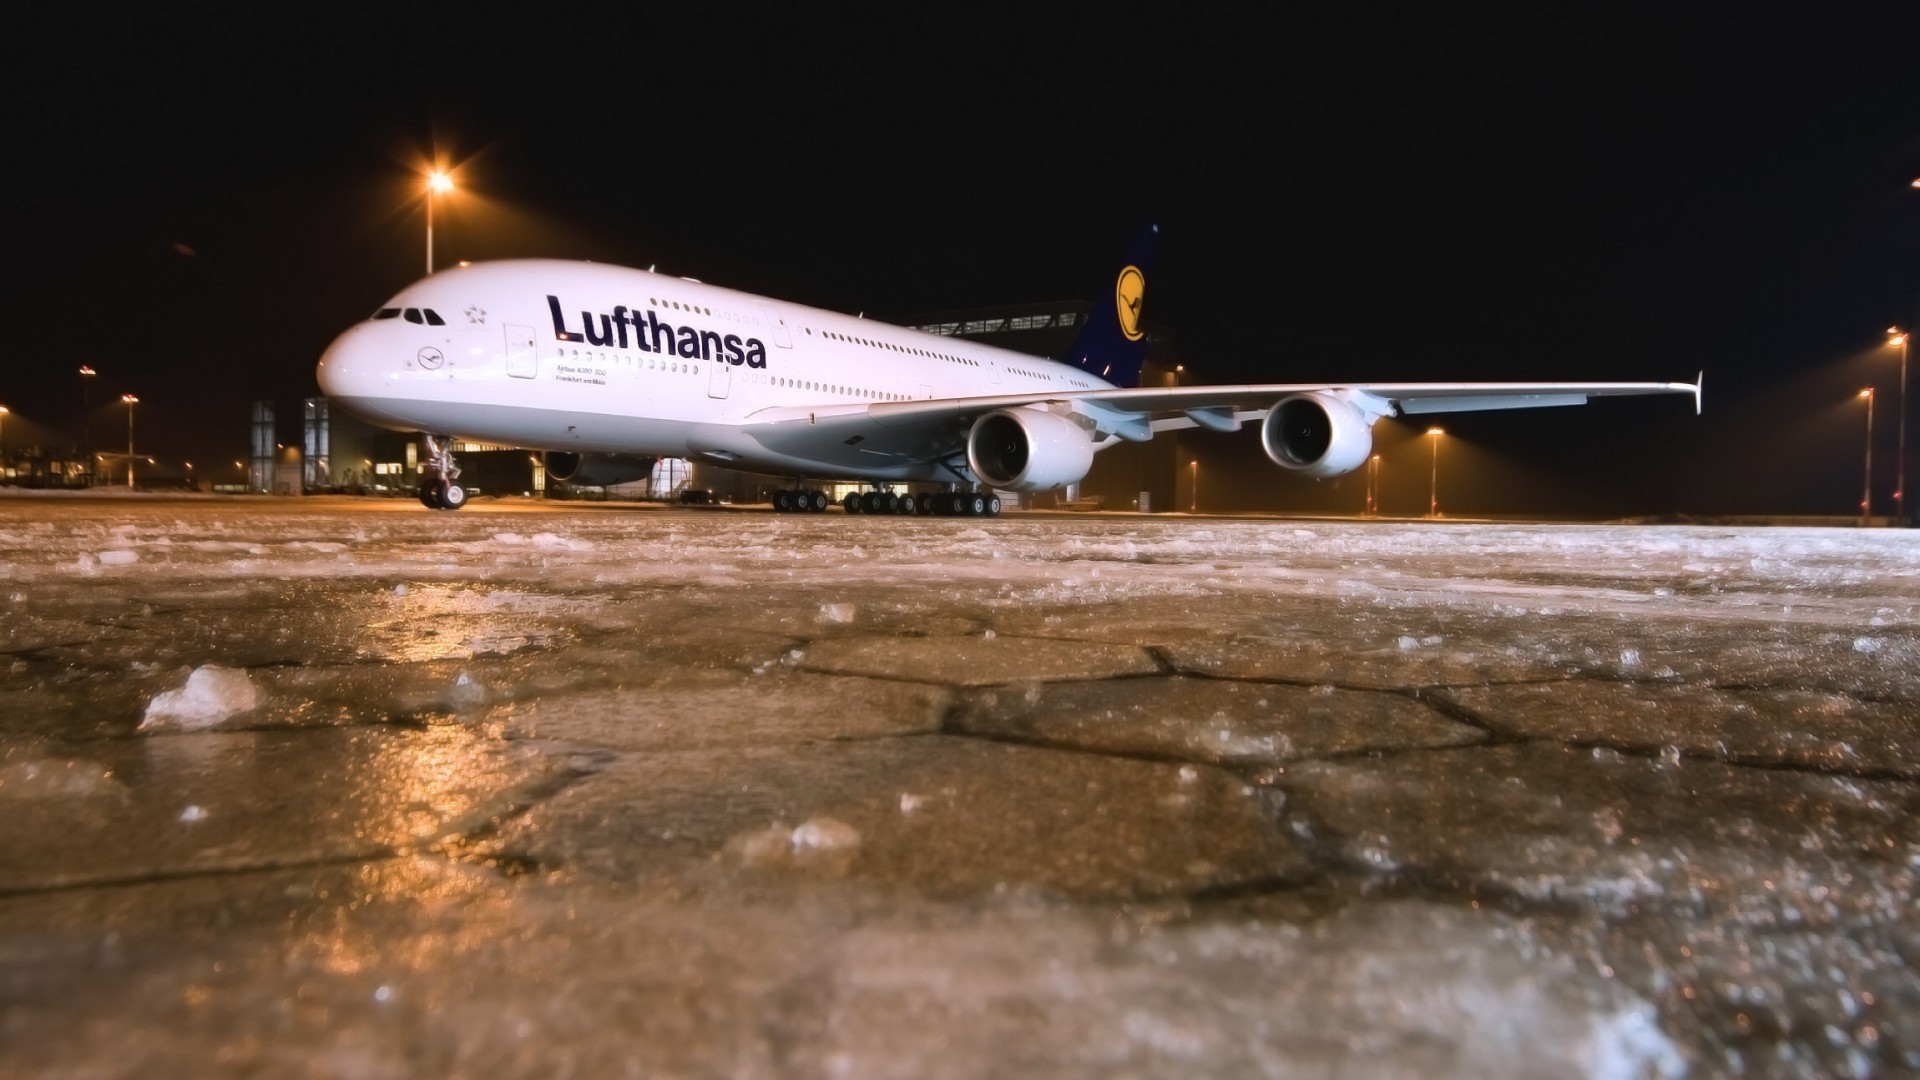 General 1920x1080 airplane Airbus A380 Lufthansa ice night airport vehicle airline Airbus french aircraft